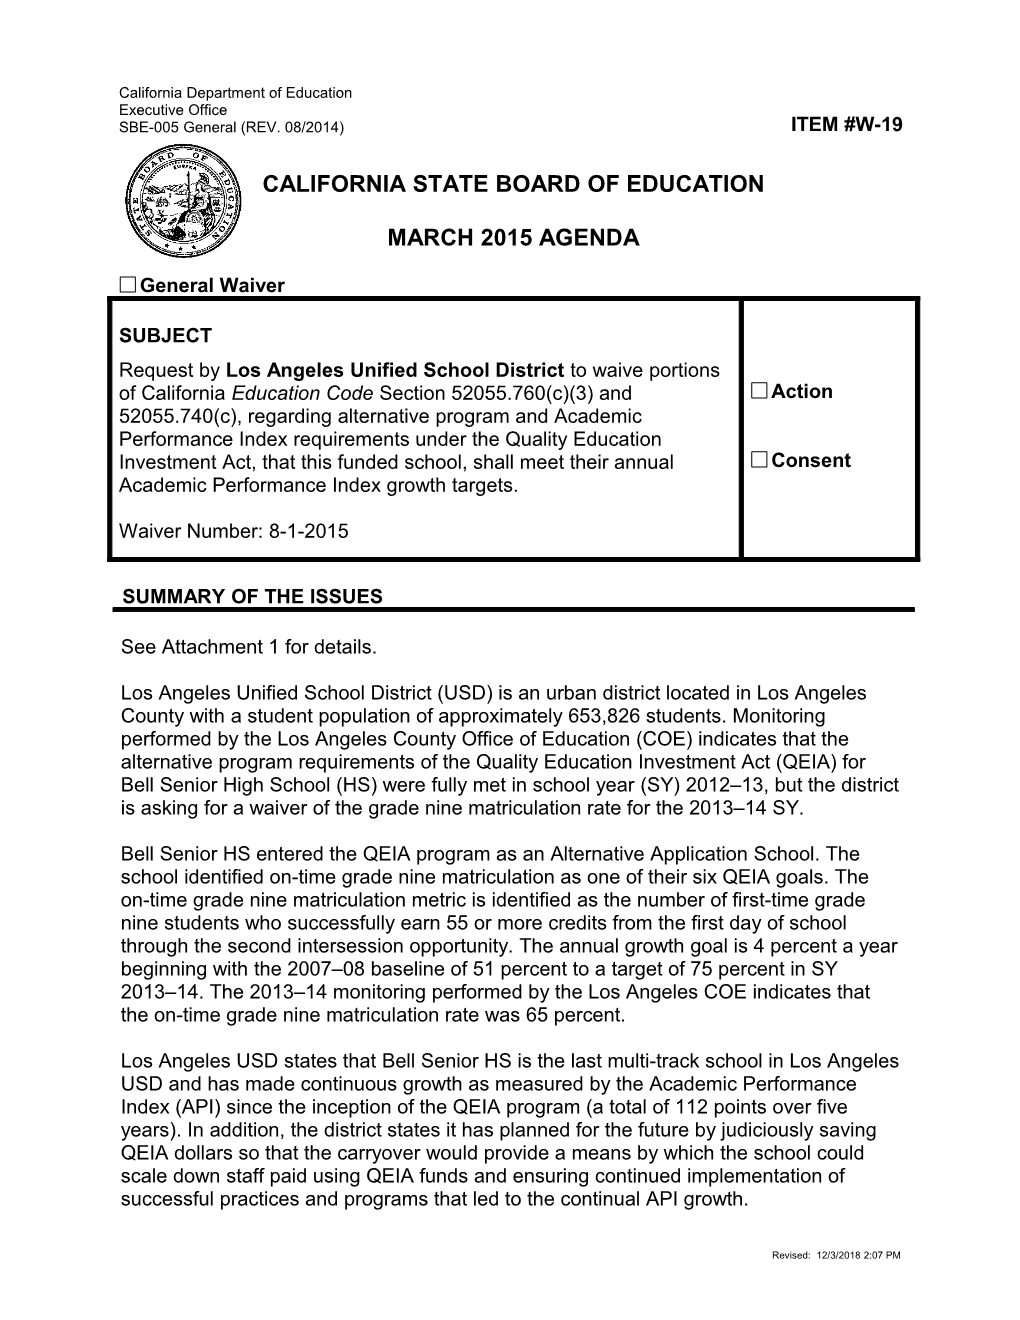 March 2015 Waiver Item W-19 Rev - Meeting Agendas (CA State Board of Education)